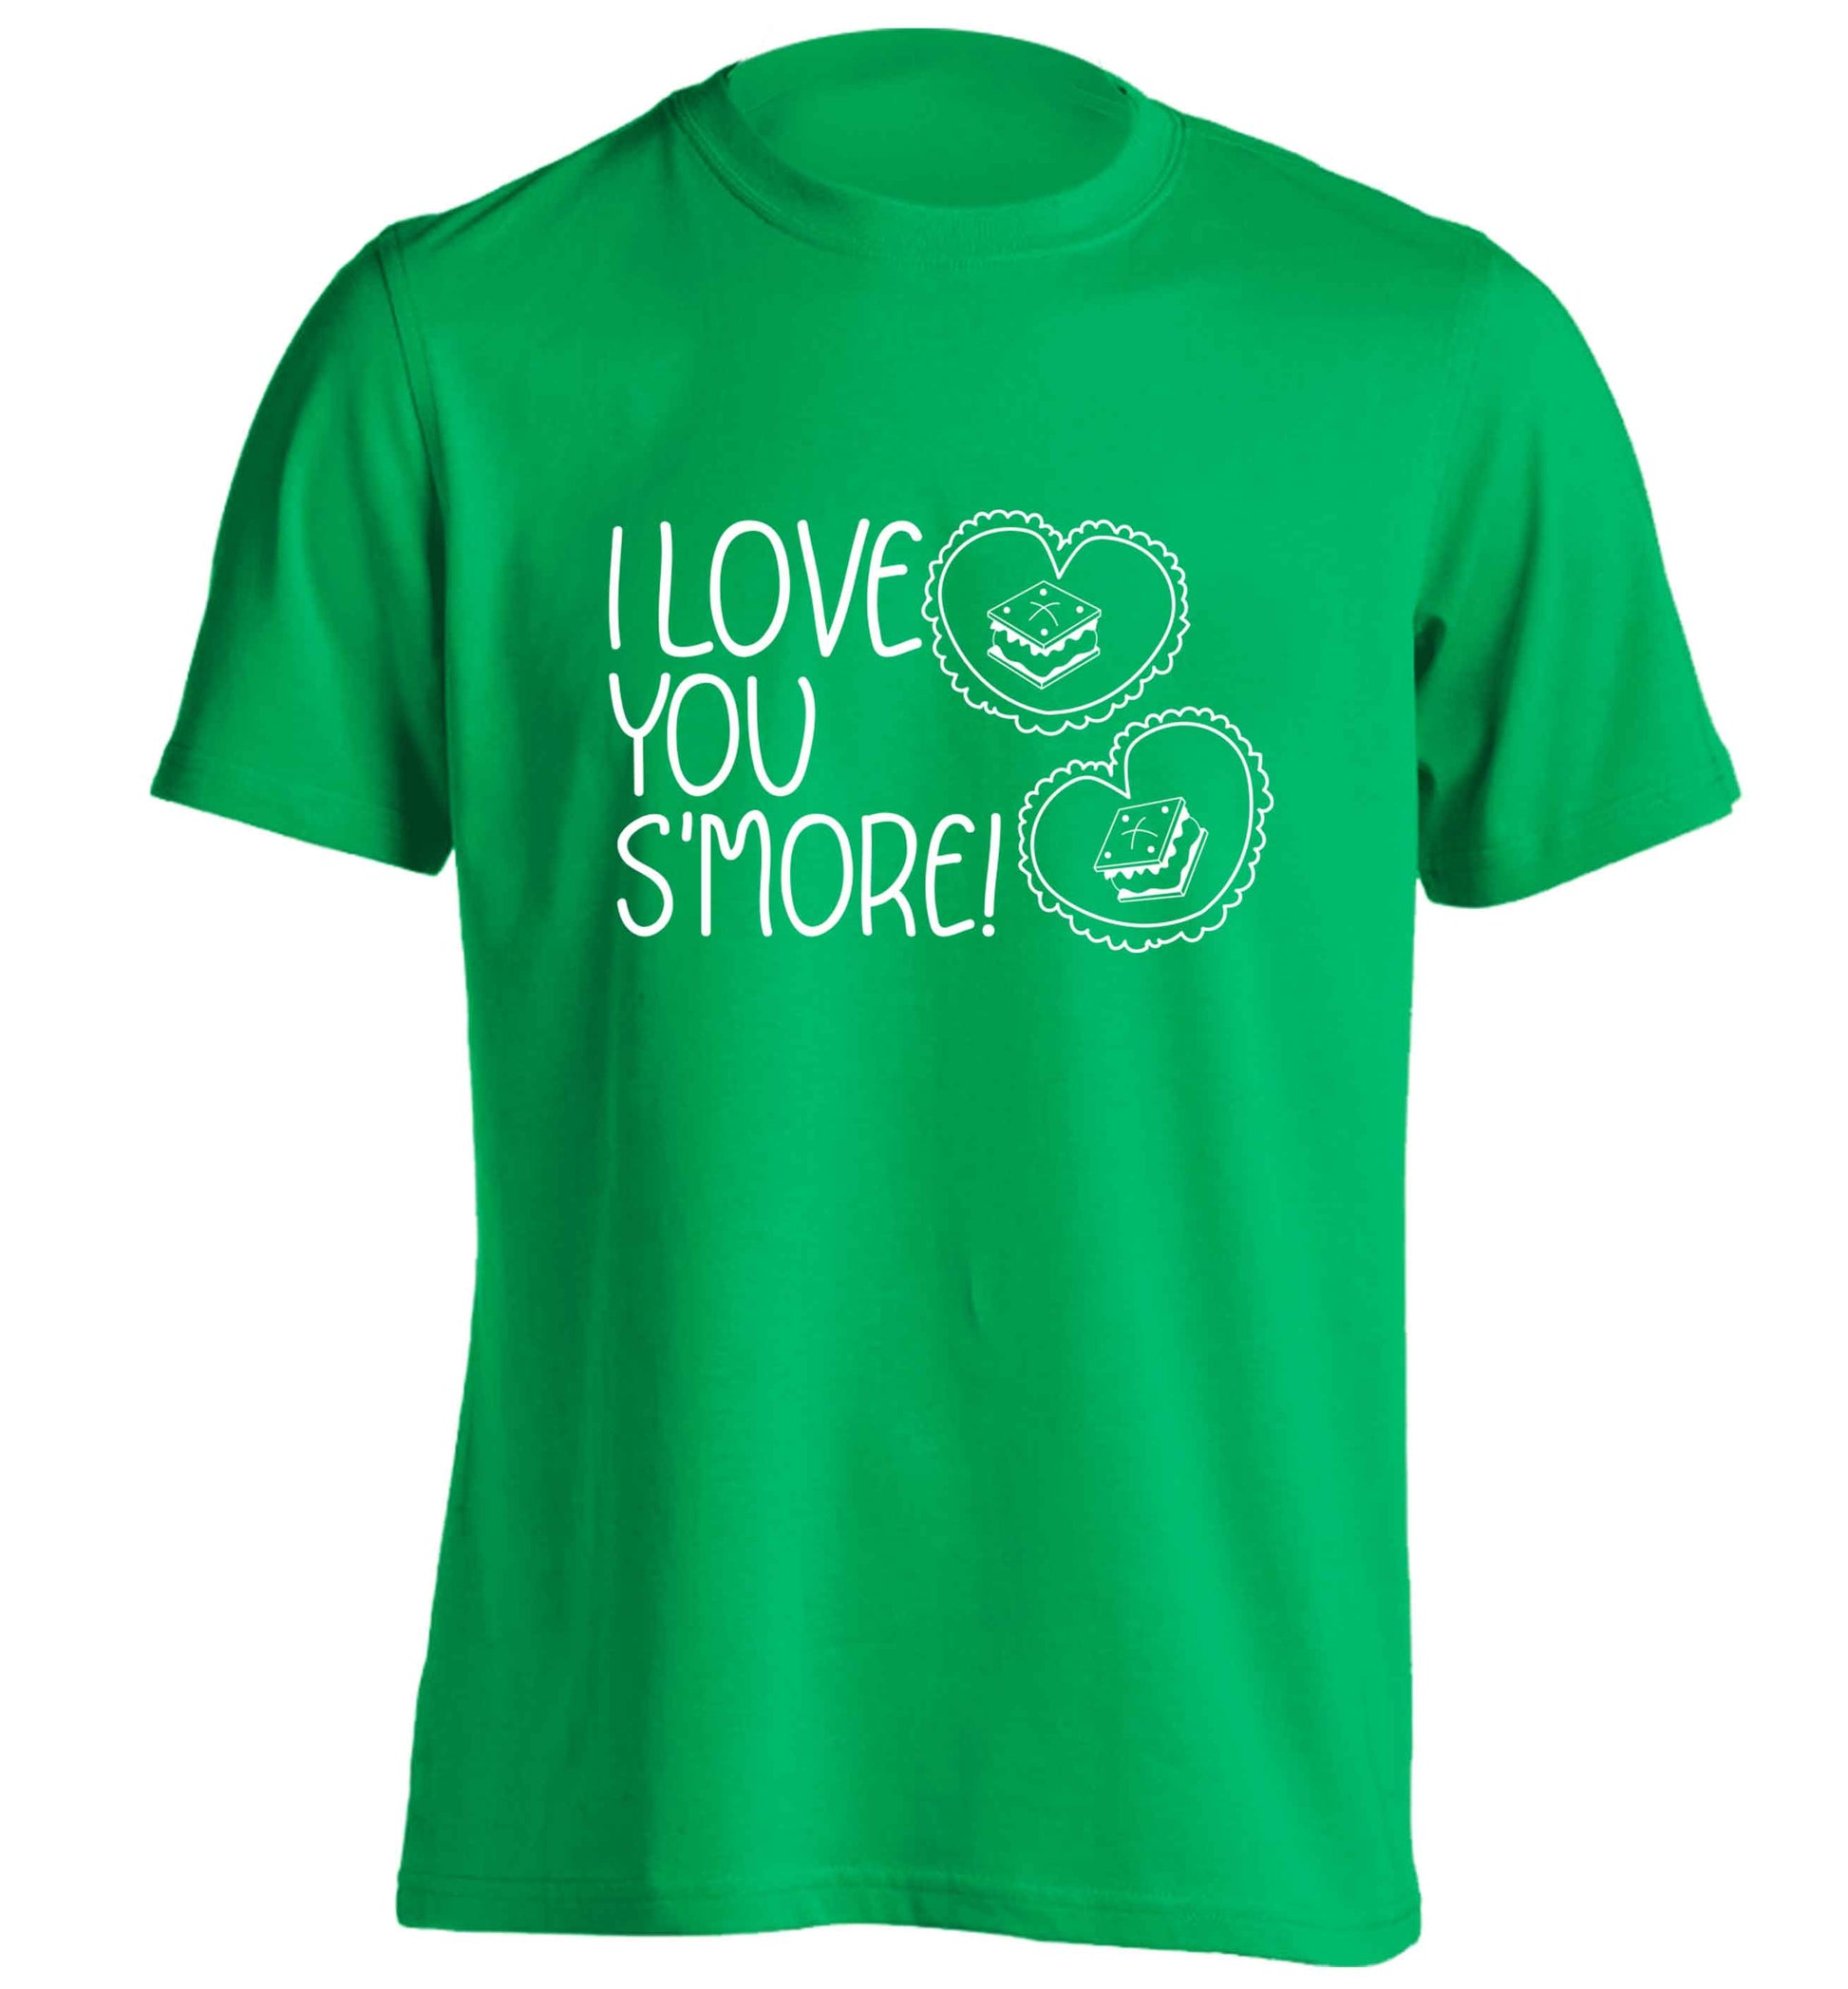 I love you s'more than anything adults unisex green Tshirt 2XL